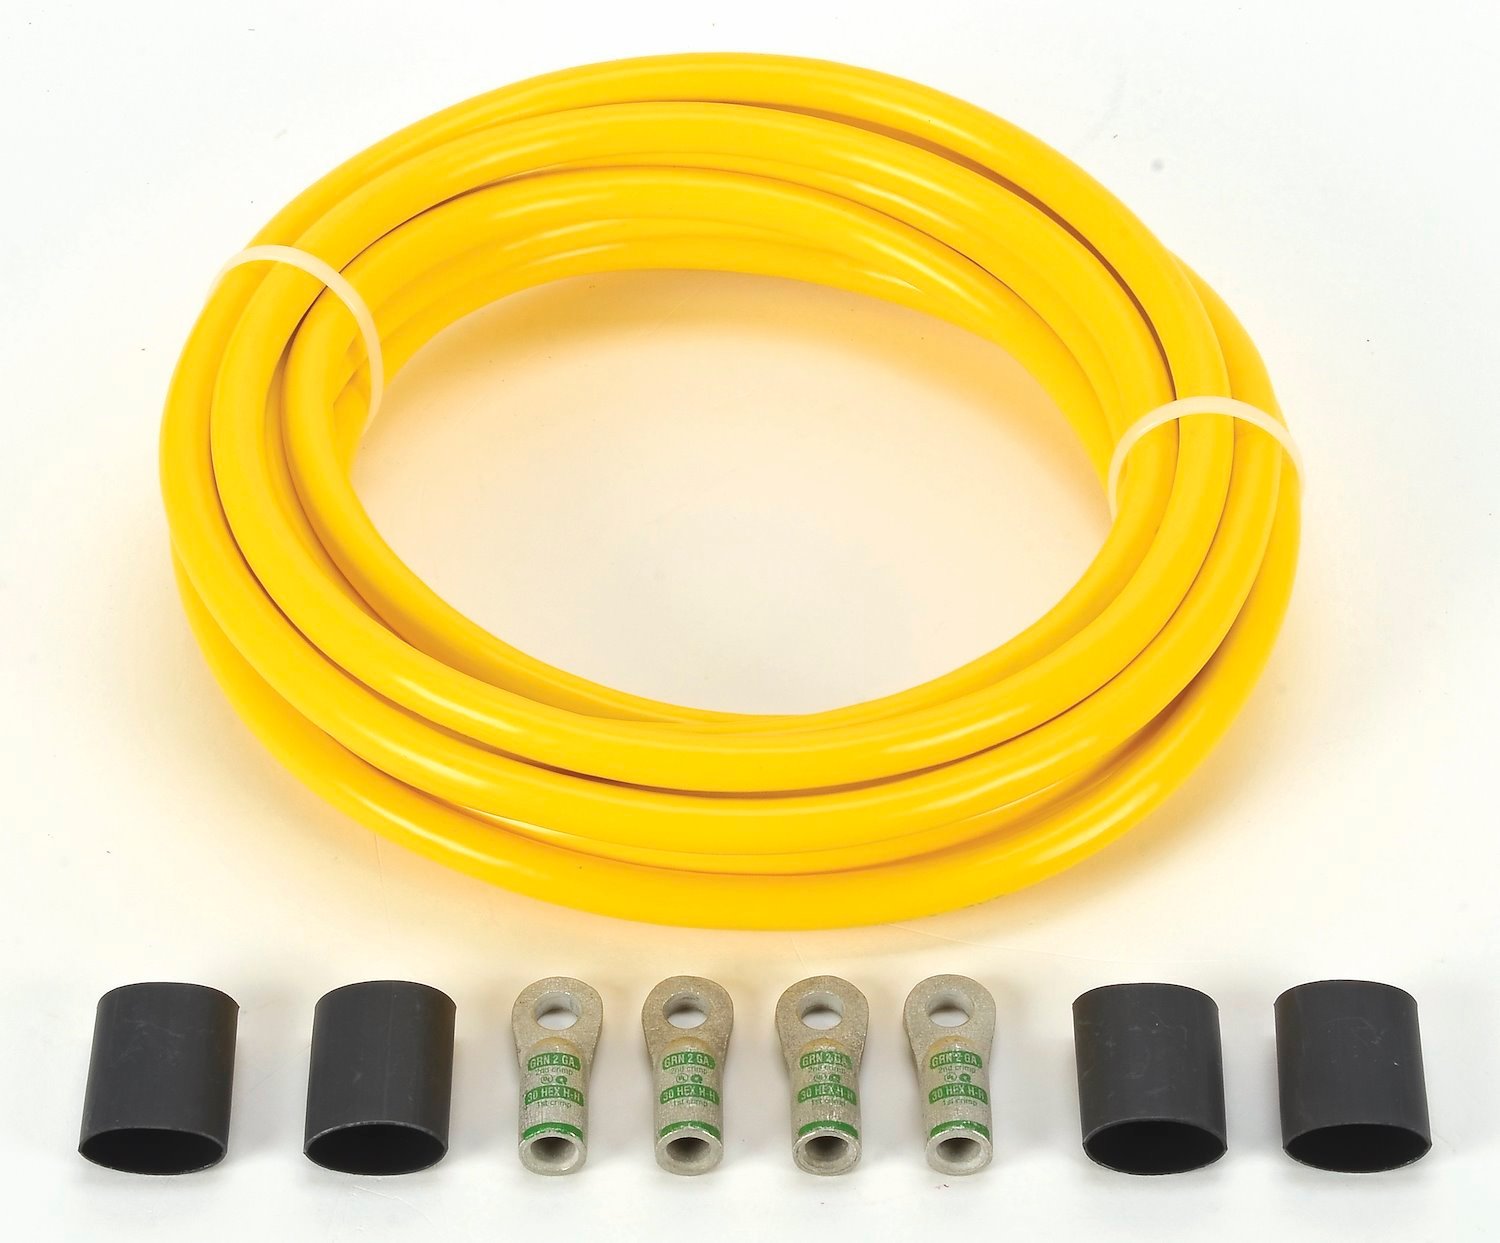 Battery Cable Kit